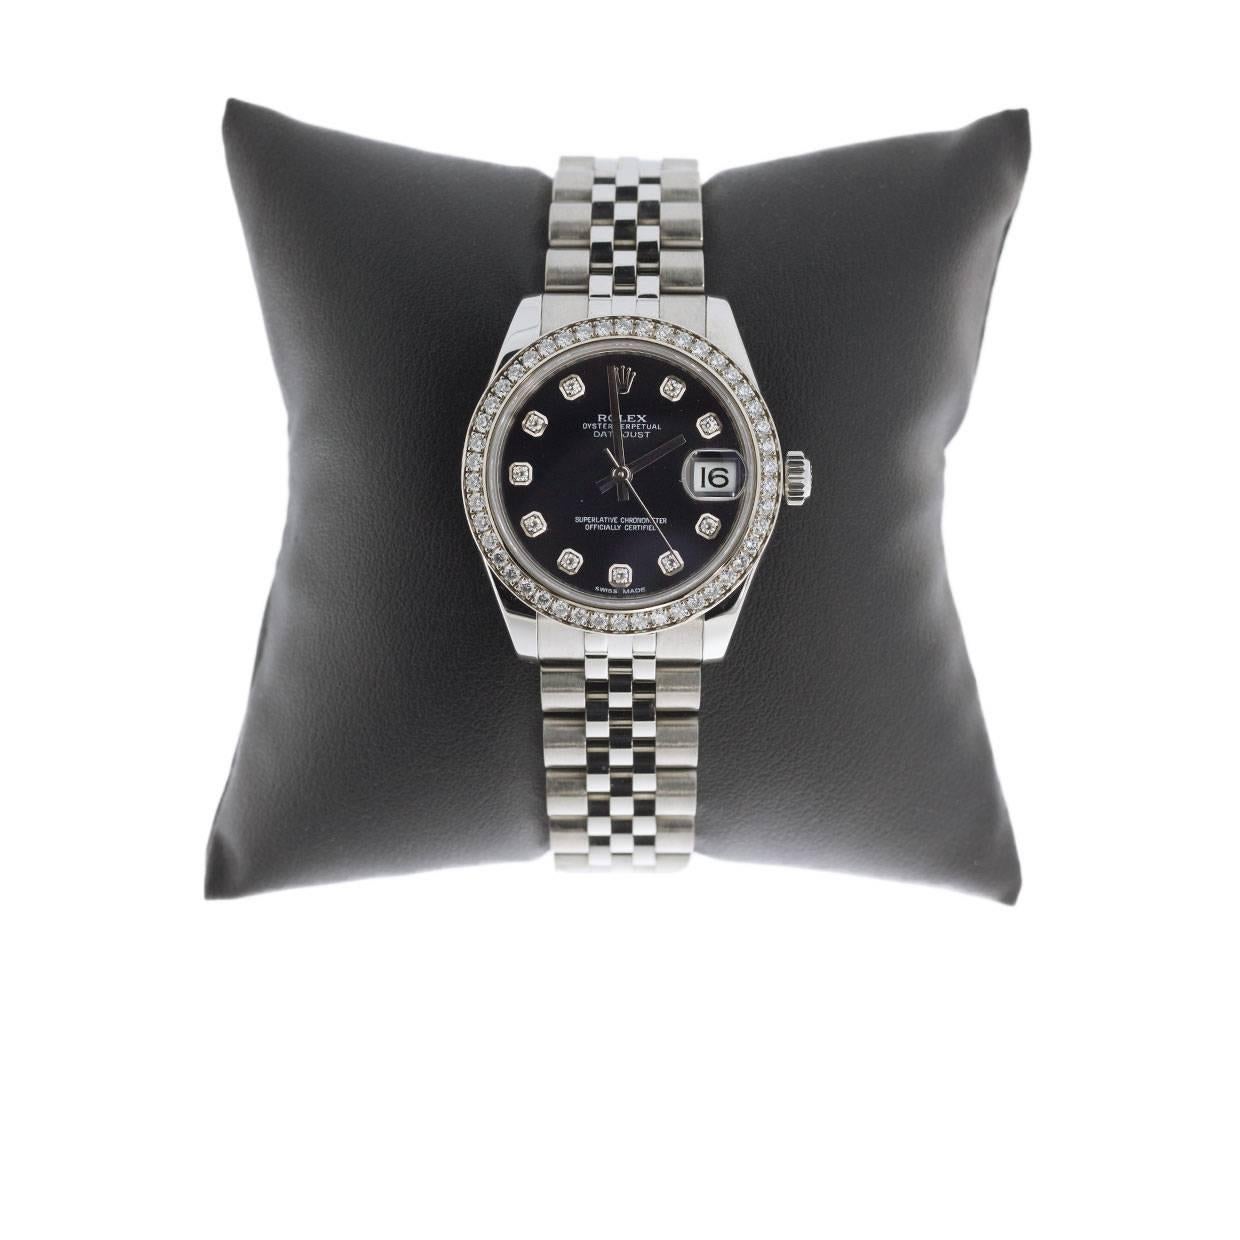 Details:
Rolex Ladies DateJust 
Model# 178384
Diamond bezel and dial
Black watch face
Stainless Steel 31mm Case
Jubilee bracelet
MSRP $15,950
Comes in a beautiful presentation box
An adult signature will be required for delivery unless other